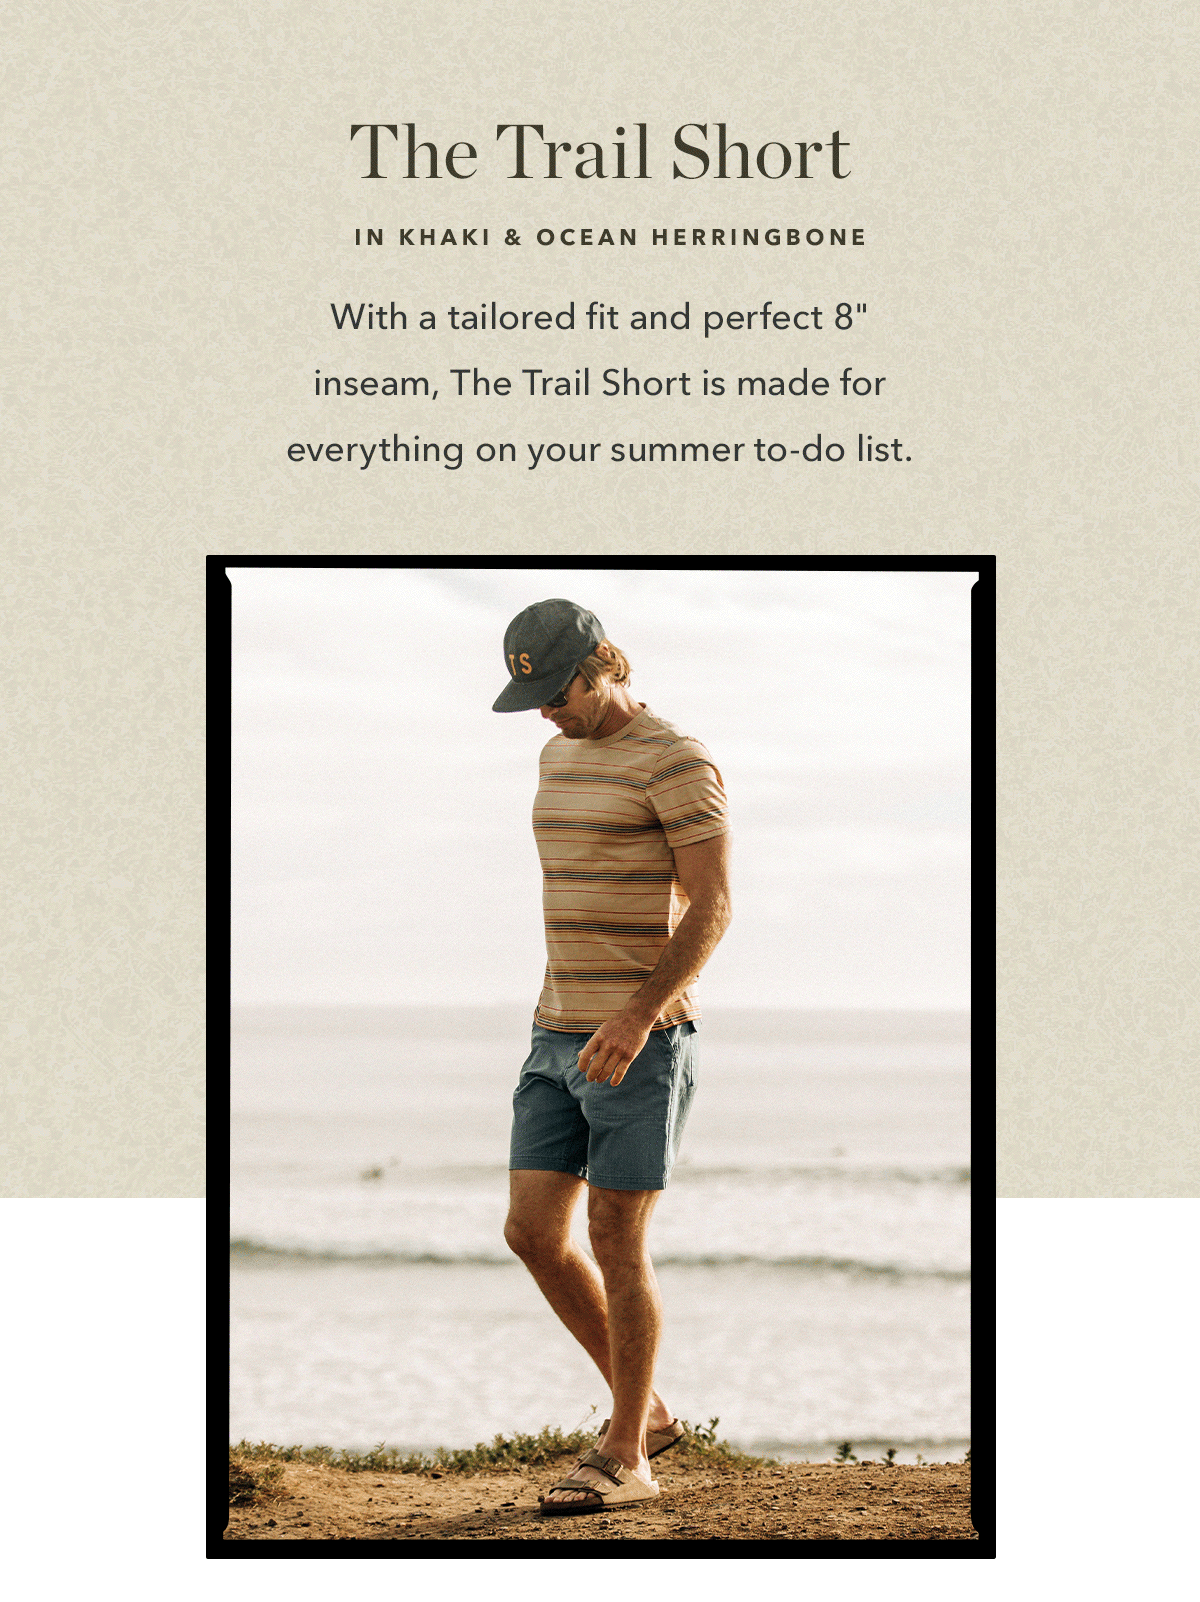 The Trail Short: With a tailored fit and perfect 8" inseam, The Trail Short is made for everything on your summer to-do list. 